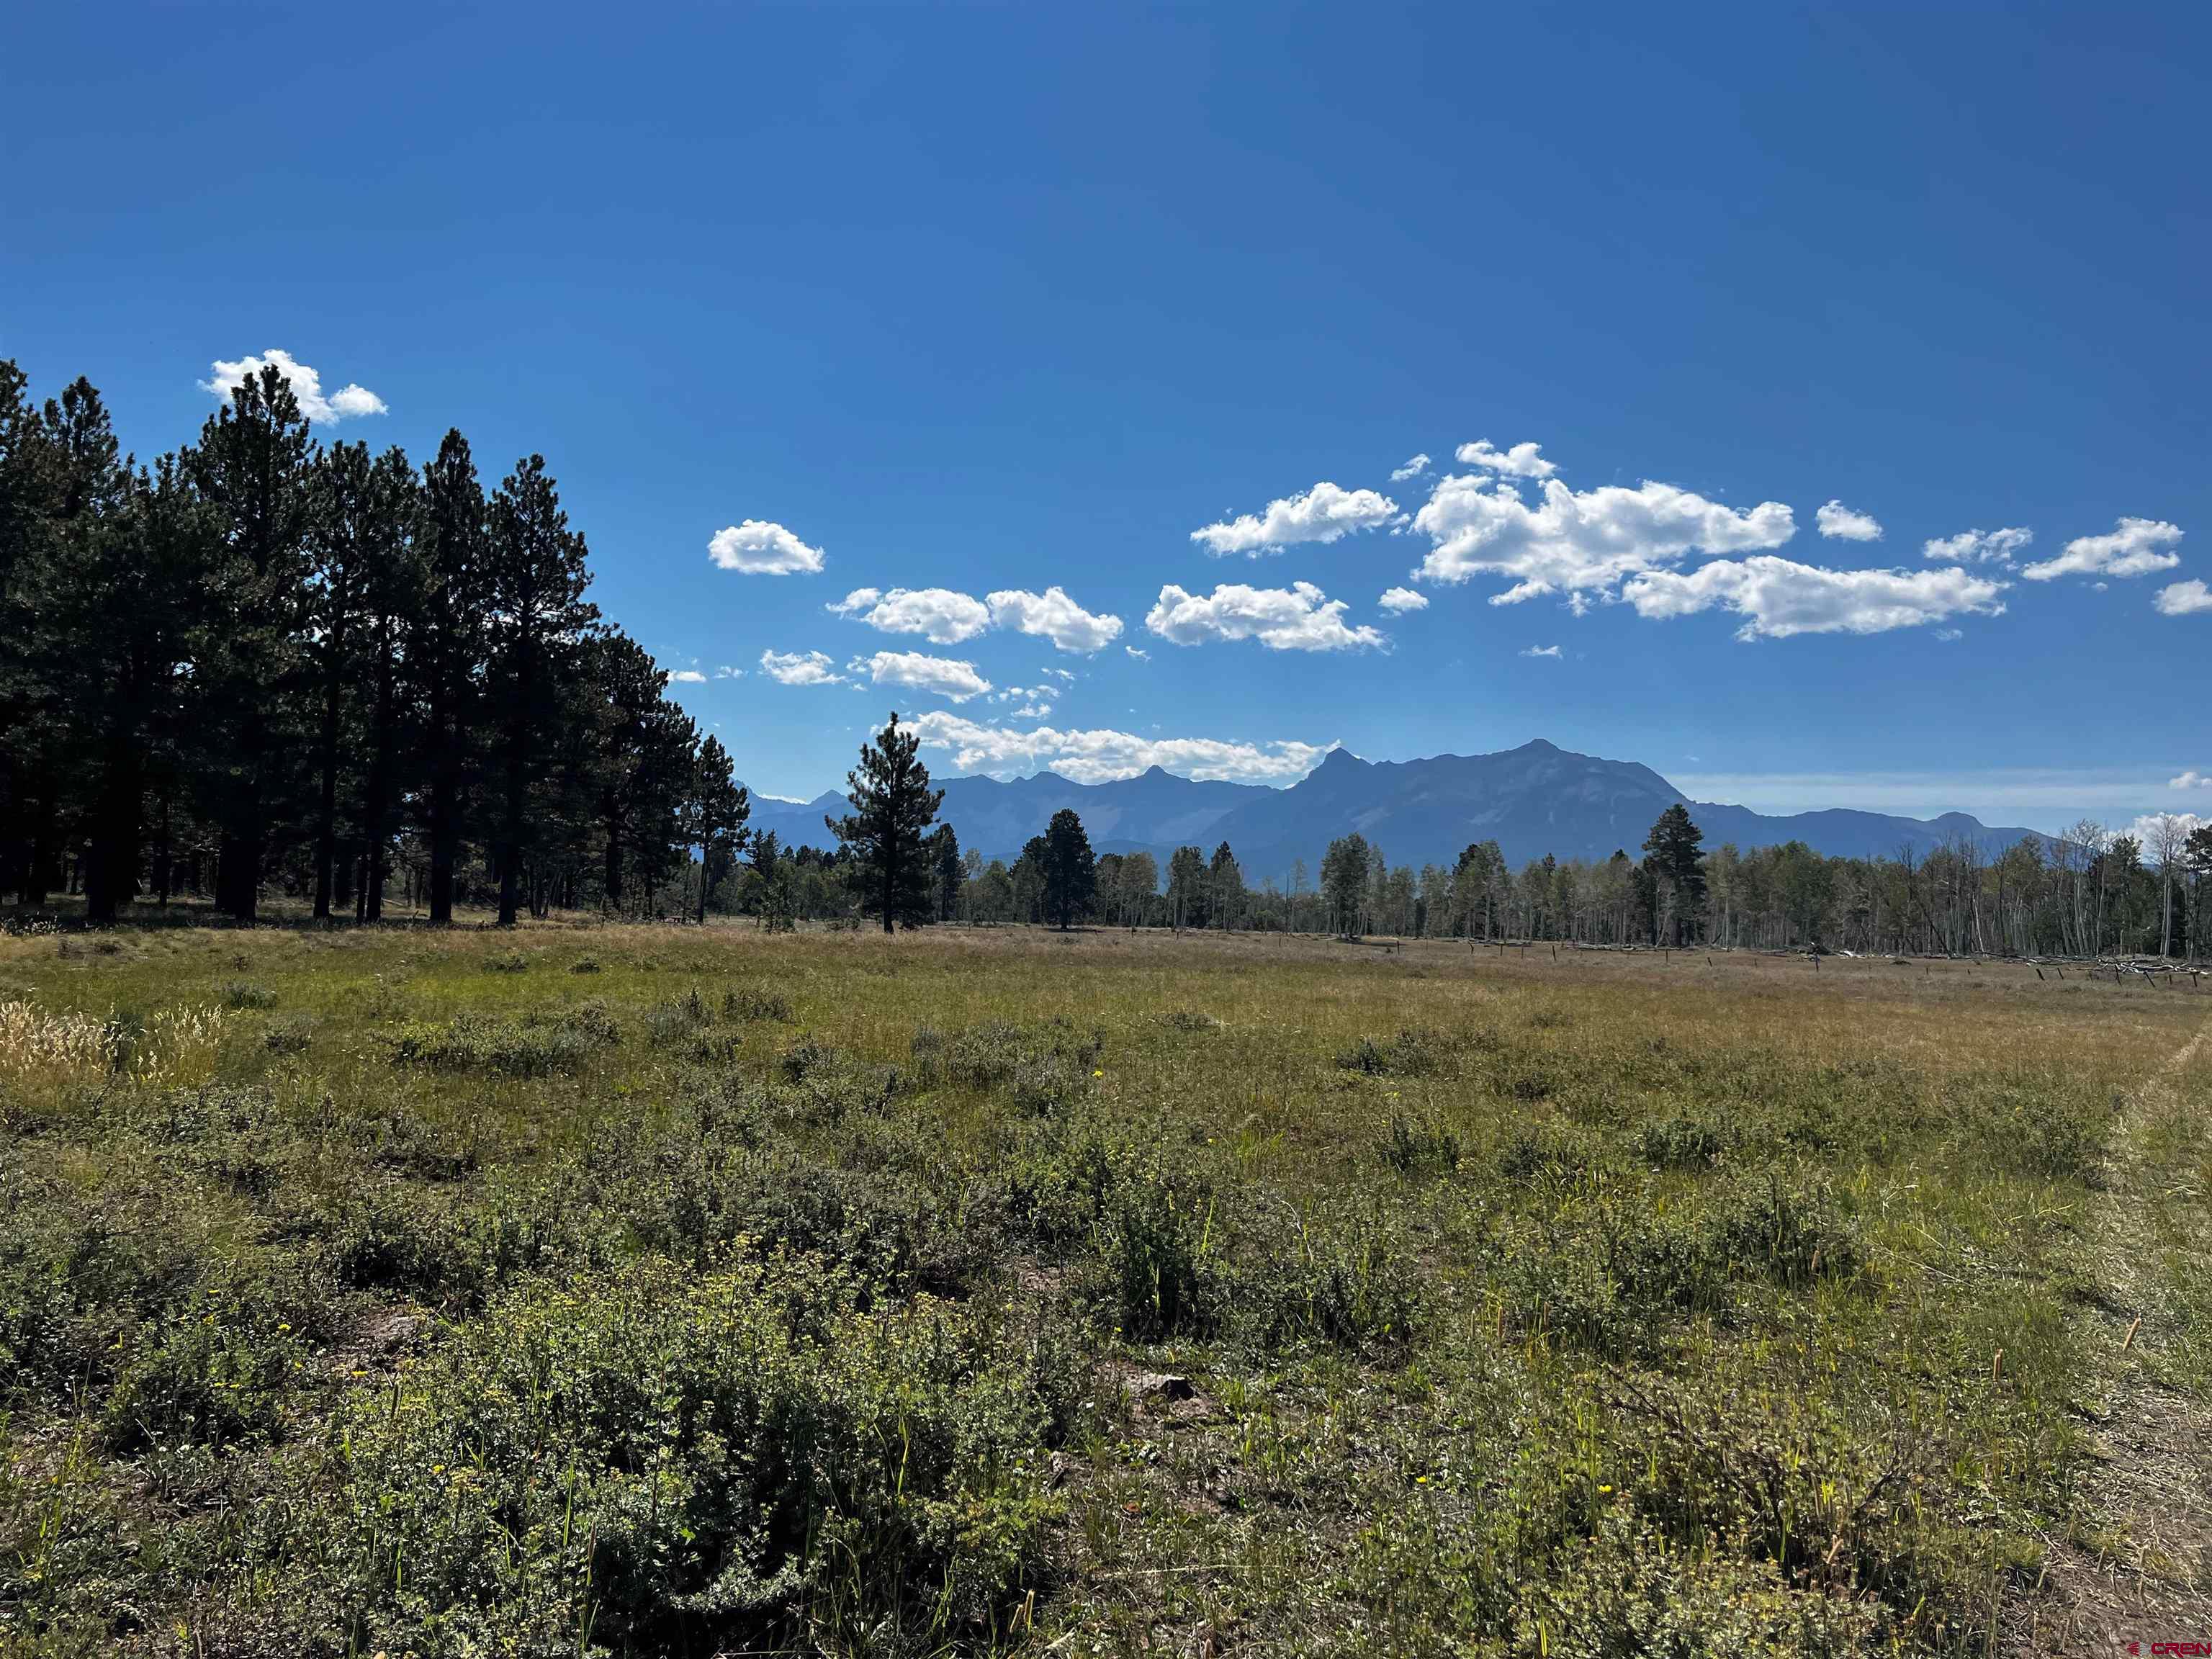 Situated in view of the majestic Sneffels Mountain Range, one of the most pristine alpine mesa sites offering the ultimate combination of privacy and beauty. This parcel is 161 acres comprised of 4- 40 acre quarter sections that can remain intact as a legacy parcel or be divided into 4 separate 40 acre parcels. The property is located roughly 30 miles from Telluride and 17 miles from Ridgway. Herds of elk, mule deer, hawks, and numerous other species frequent this parcel. Spectacular combination of mature pine and aspen forests with several spectacular meadows that open up to unparalleled views. Multiple areas on this parcel are highly suitable for home sites and/ or barns and other outbuildings. This is a rare opportunity for a spectacular parcel in a truly special corner of the world.